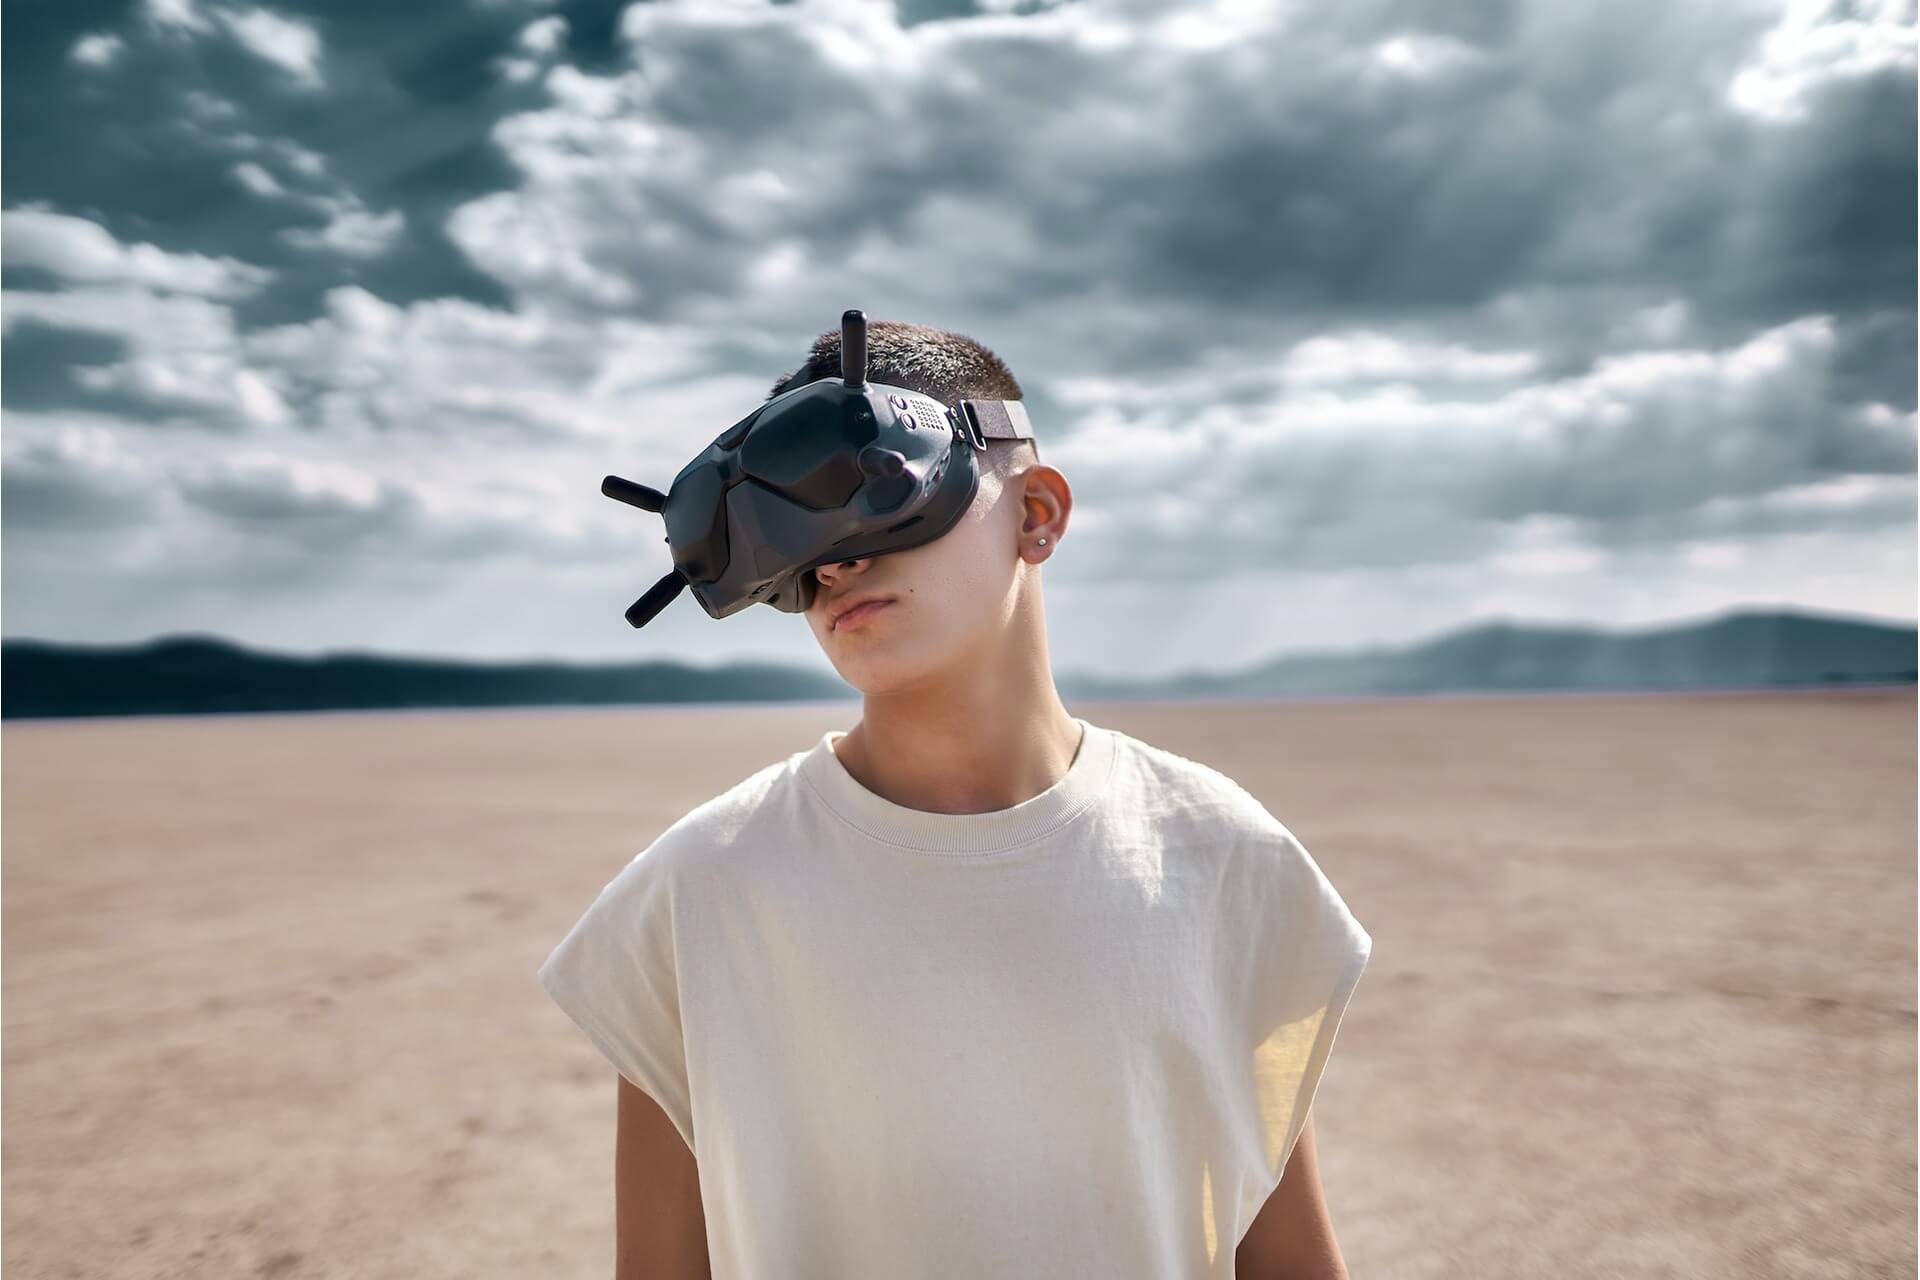 Man in a white vest with Virtual reality goggles standing in a dessert